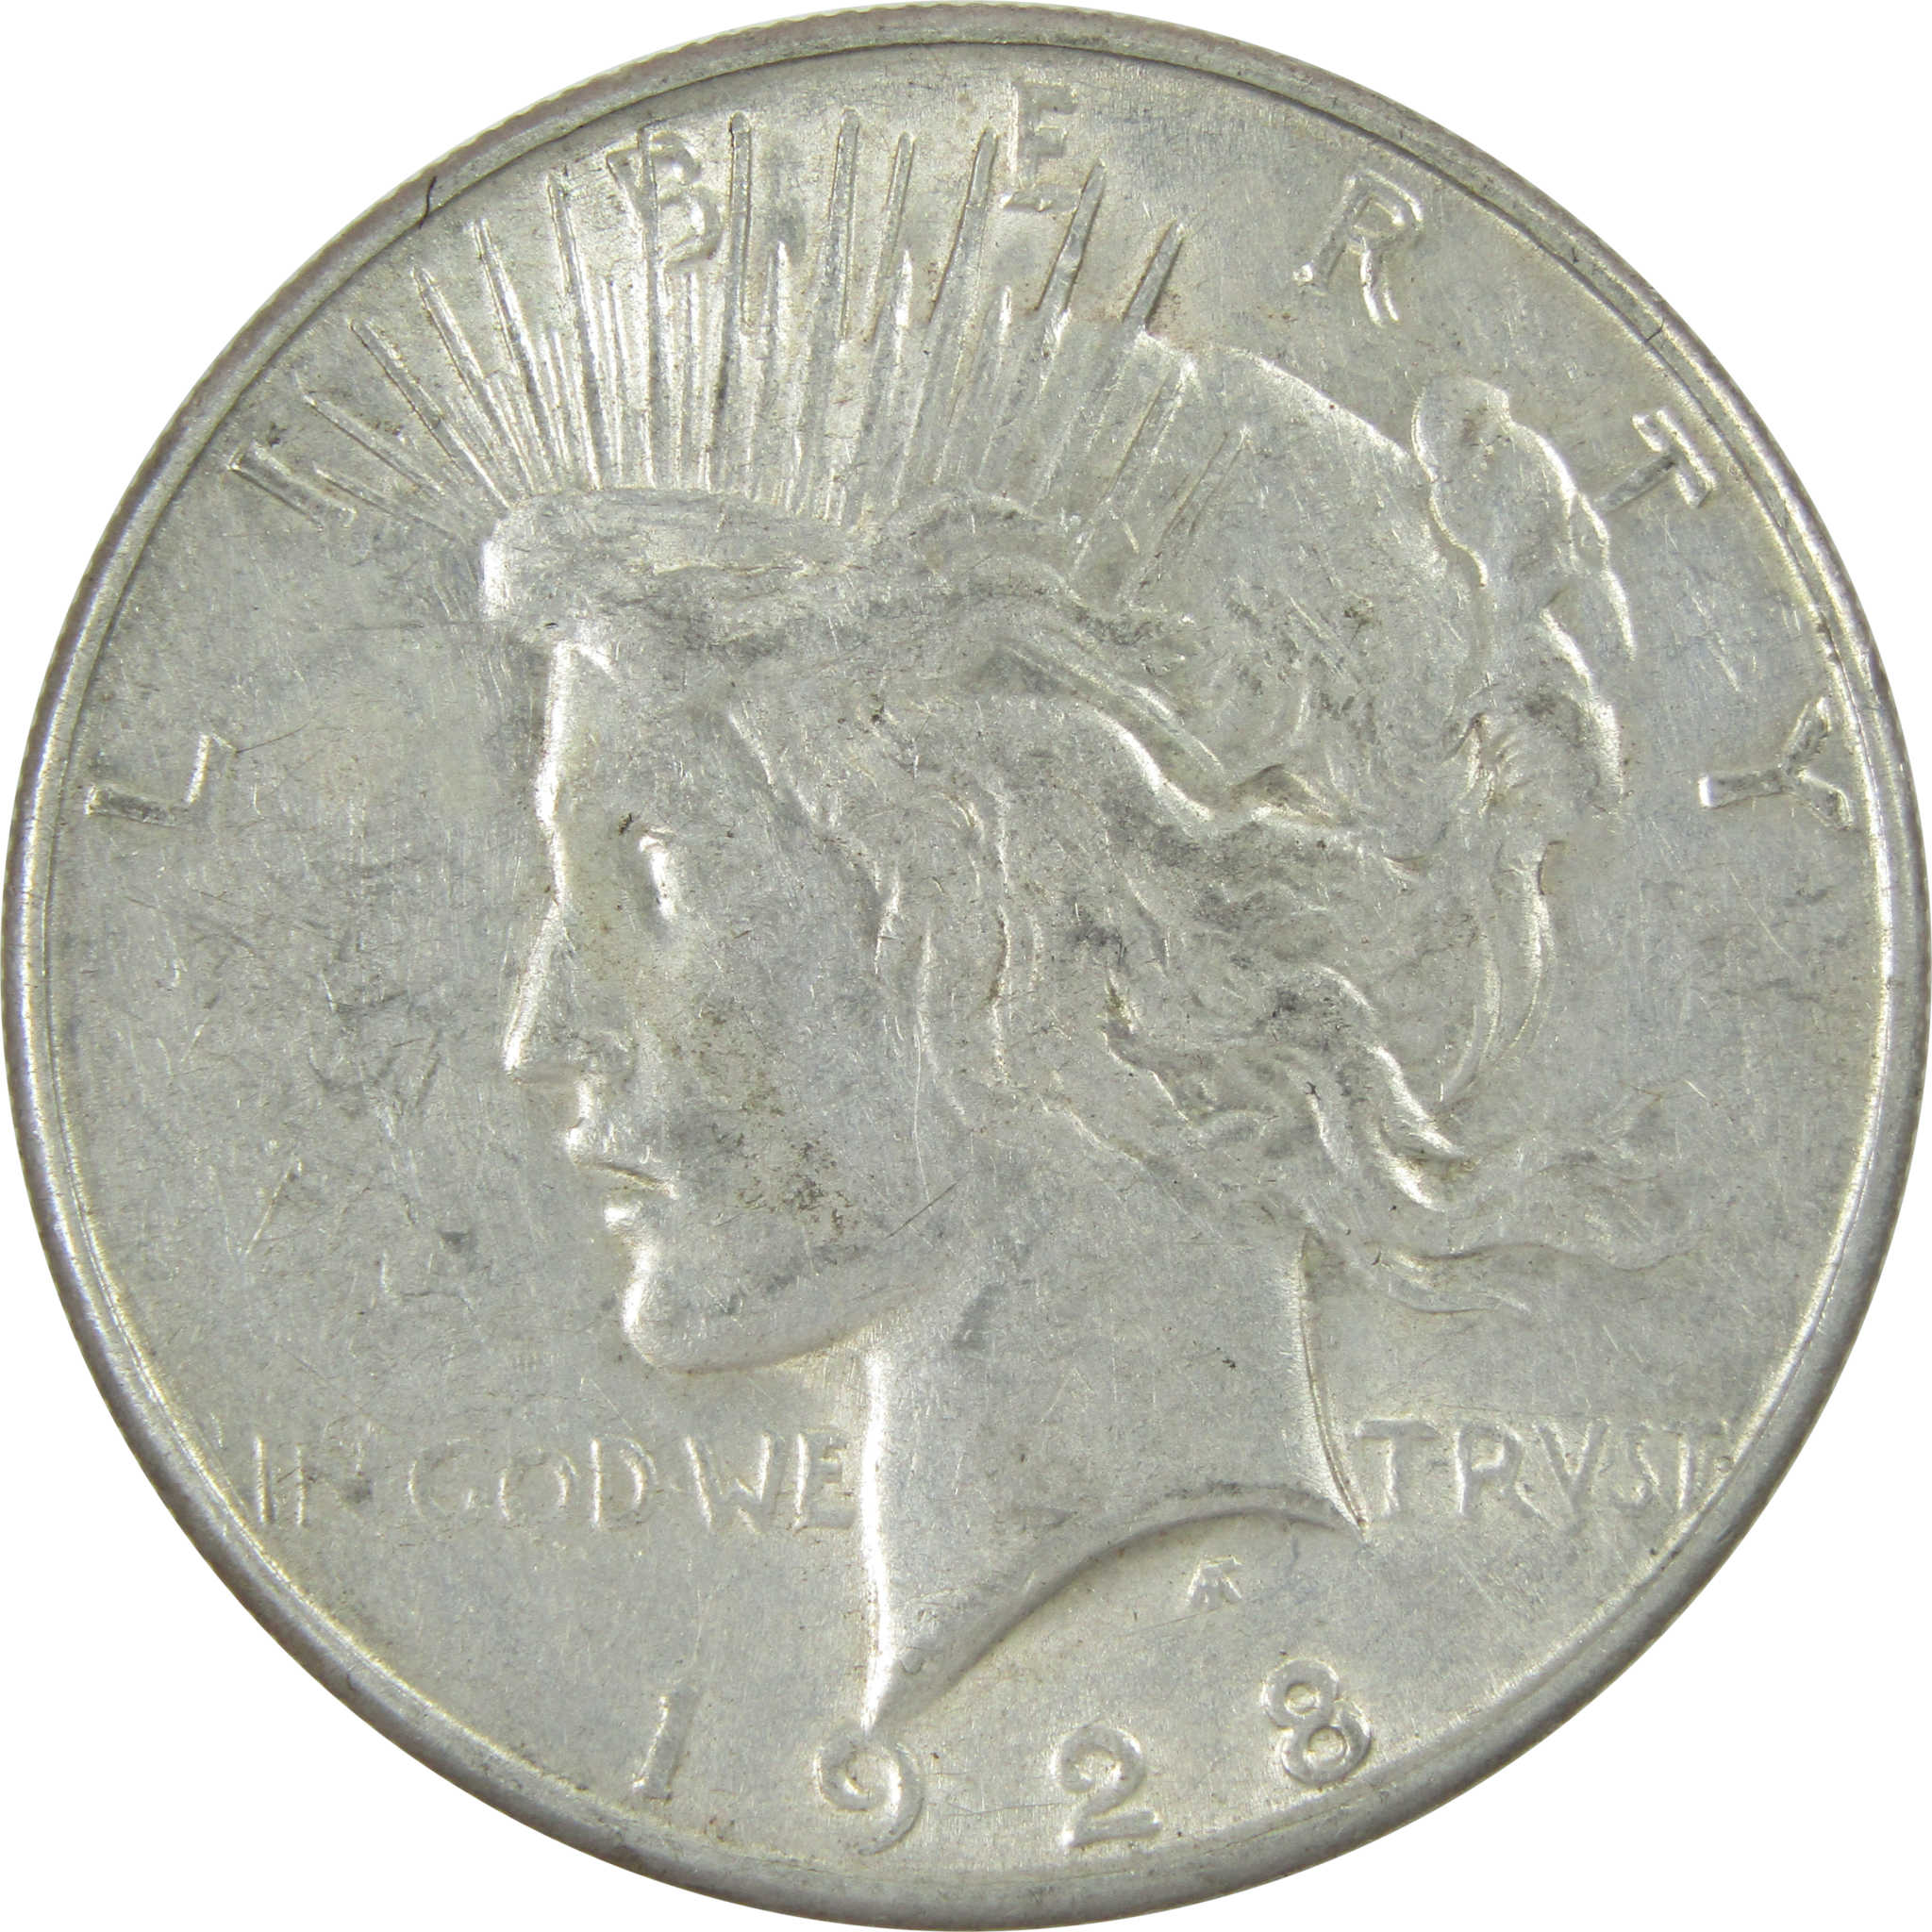 1928 S Peace Dollar AU About Uncirculated Silver $1 Coin SKU:I13690